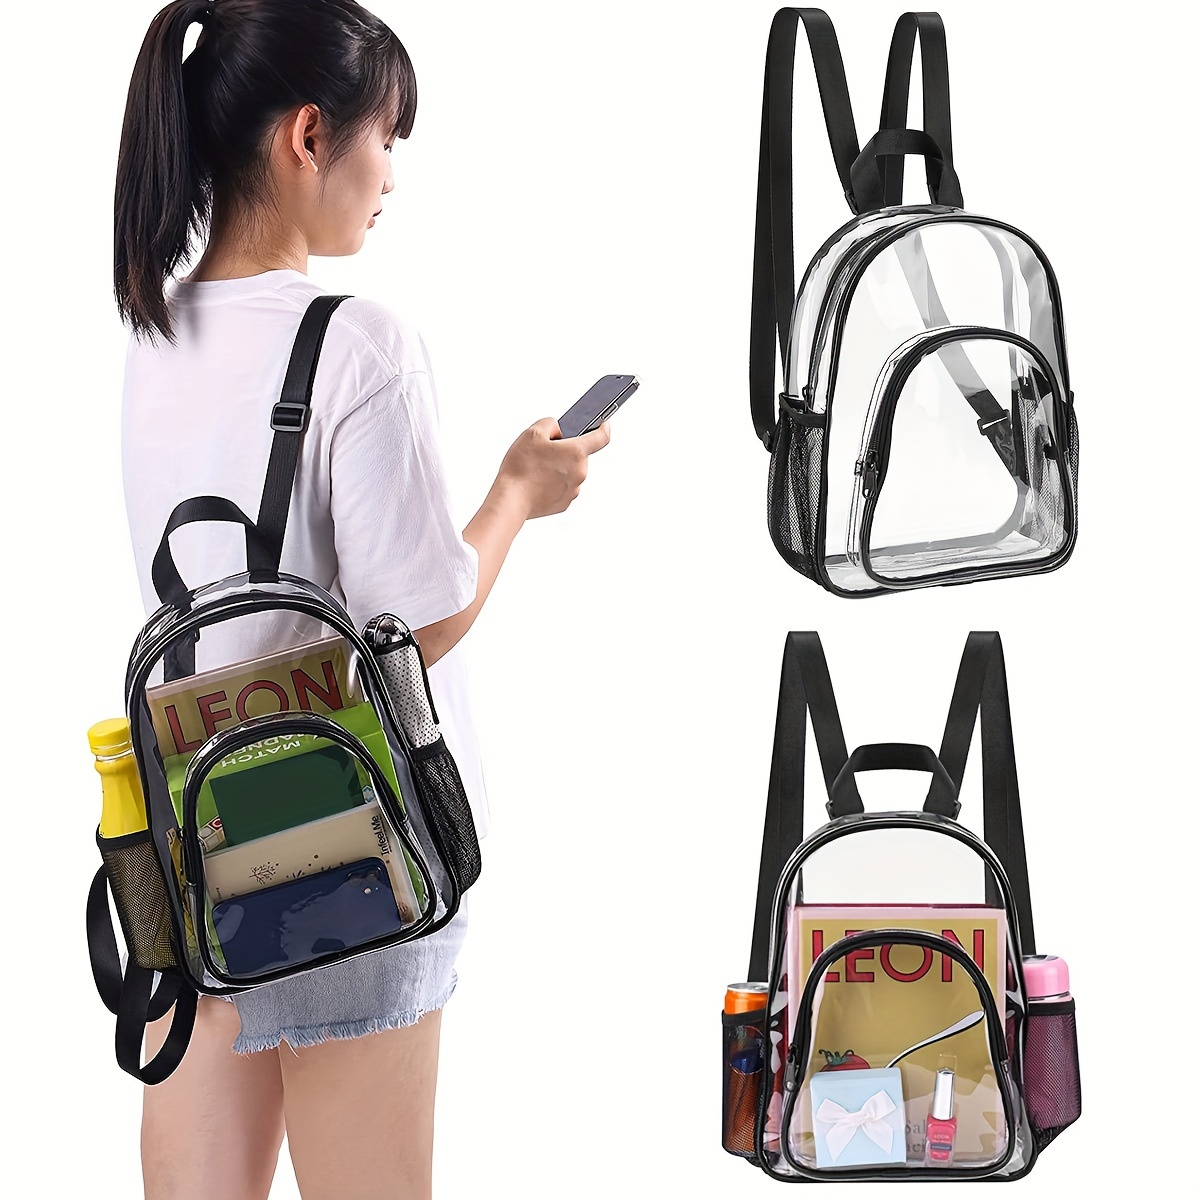 

Pvc Transparent Backpack Clear Small Backpack Durable Backpack Portable Lightweight Mini Cute Clear Bag Fashion Daypack 30.5×24×10cm For Work Outdoor Sports Event Concerts School